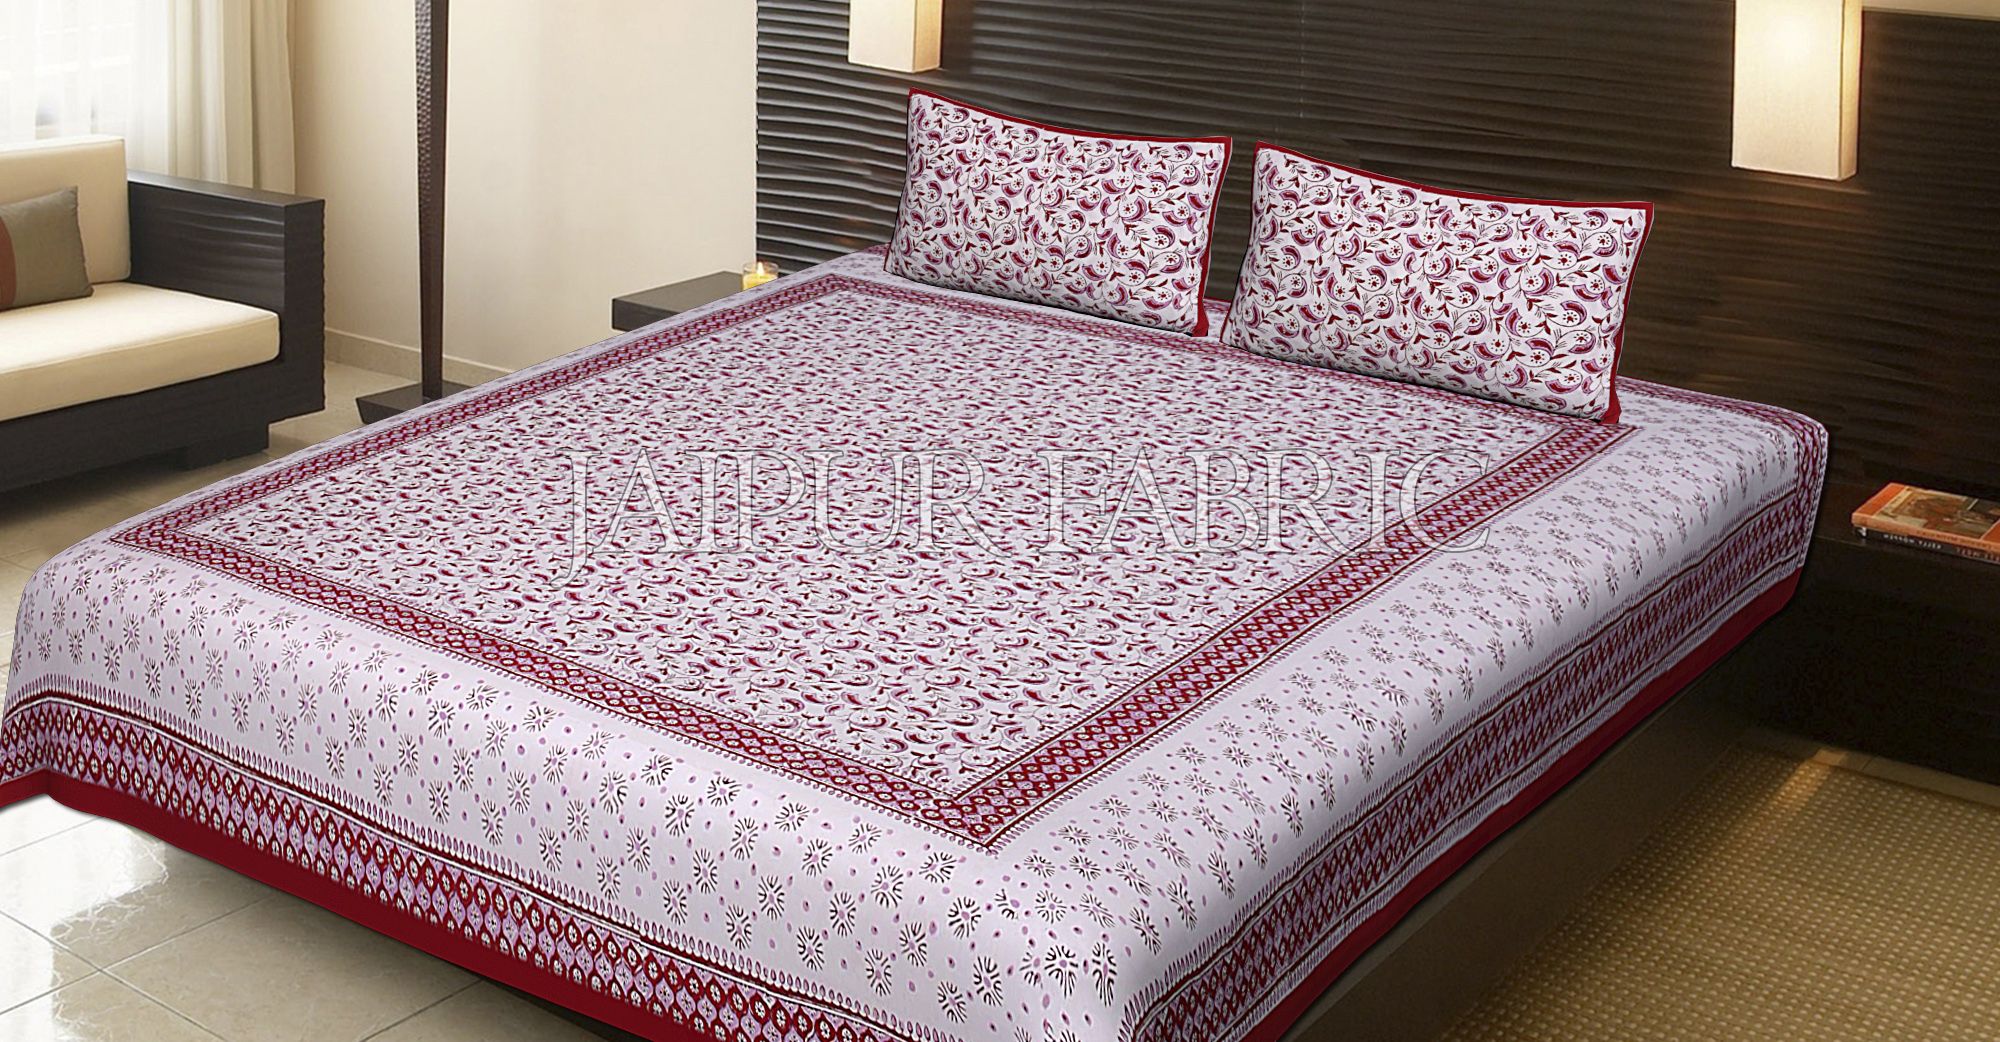 Red Border Leaf Pattern Block Print Cotton Double Bed Sheet